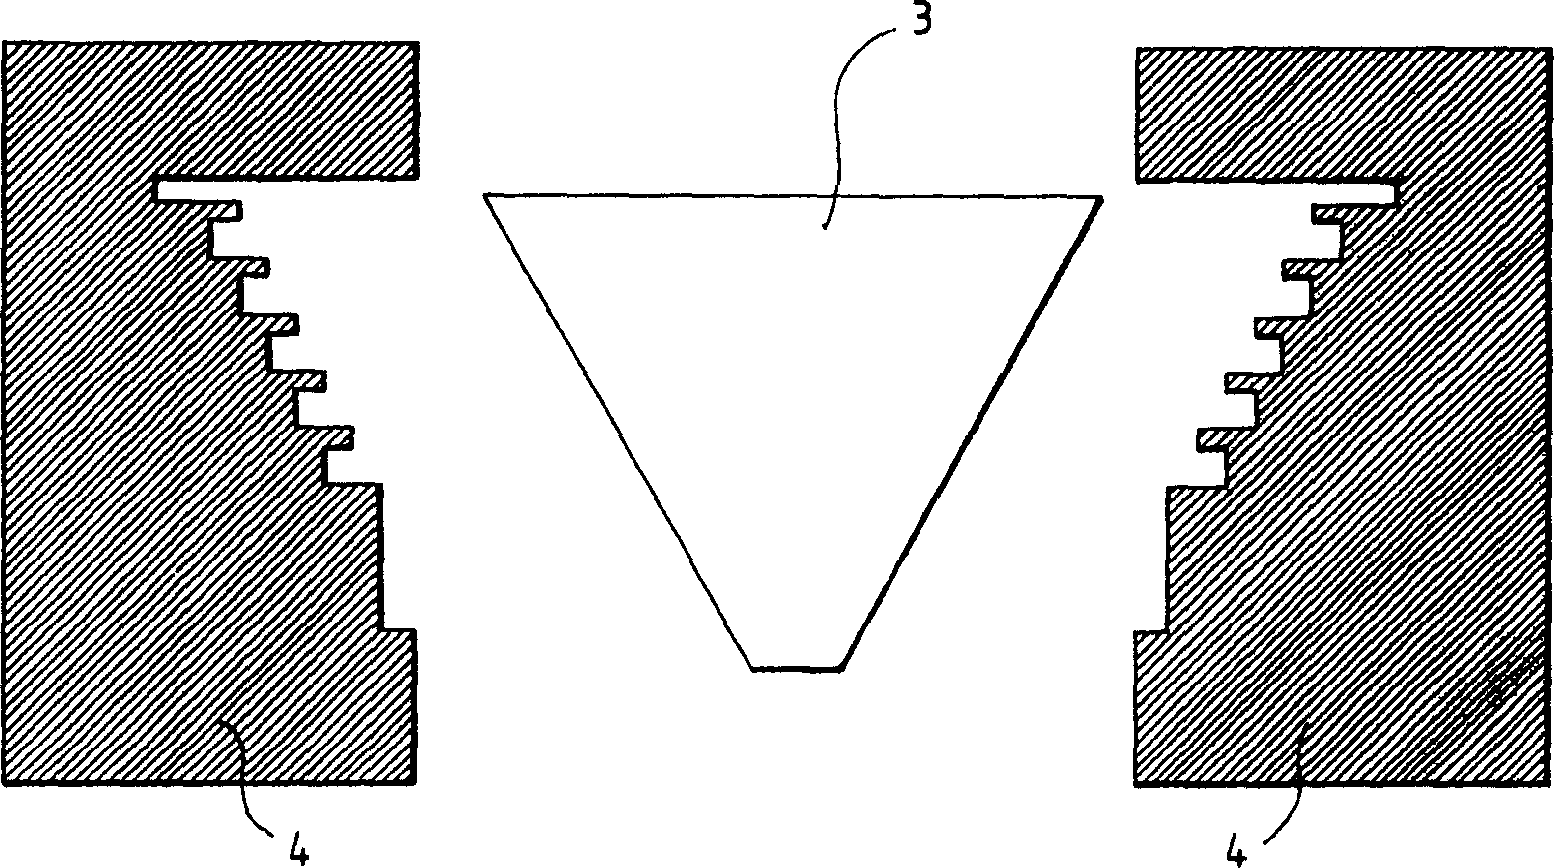 Method for making a waveguide microwave antenna